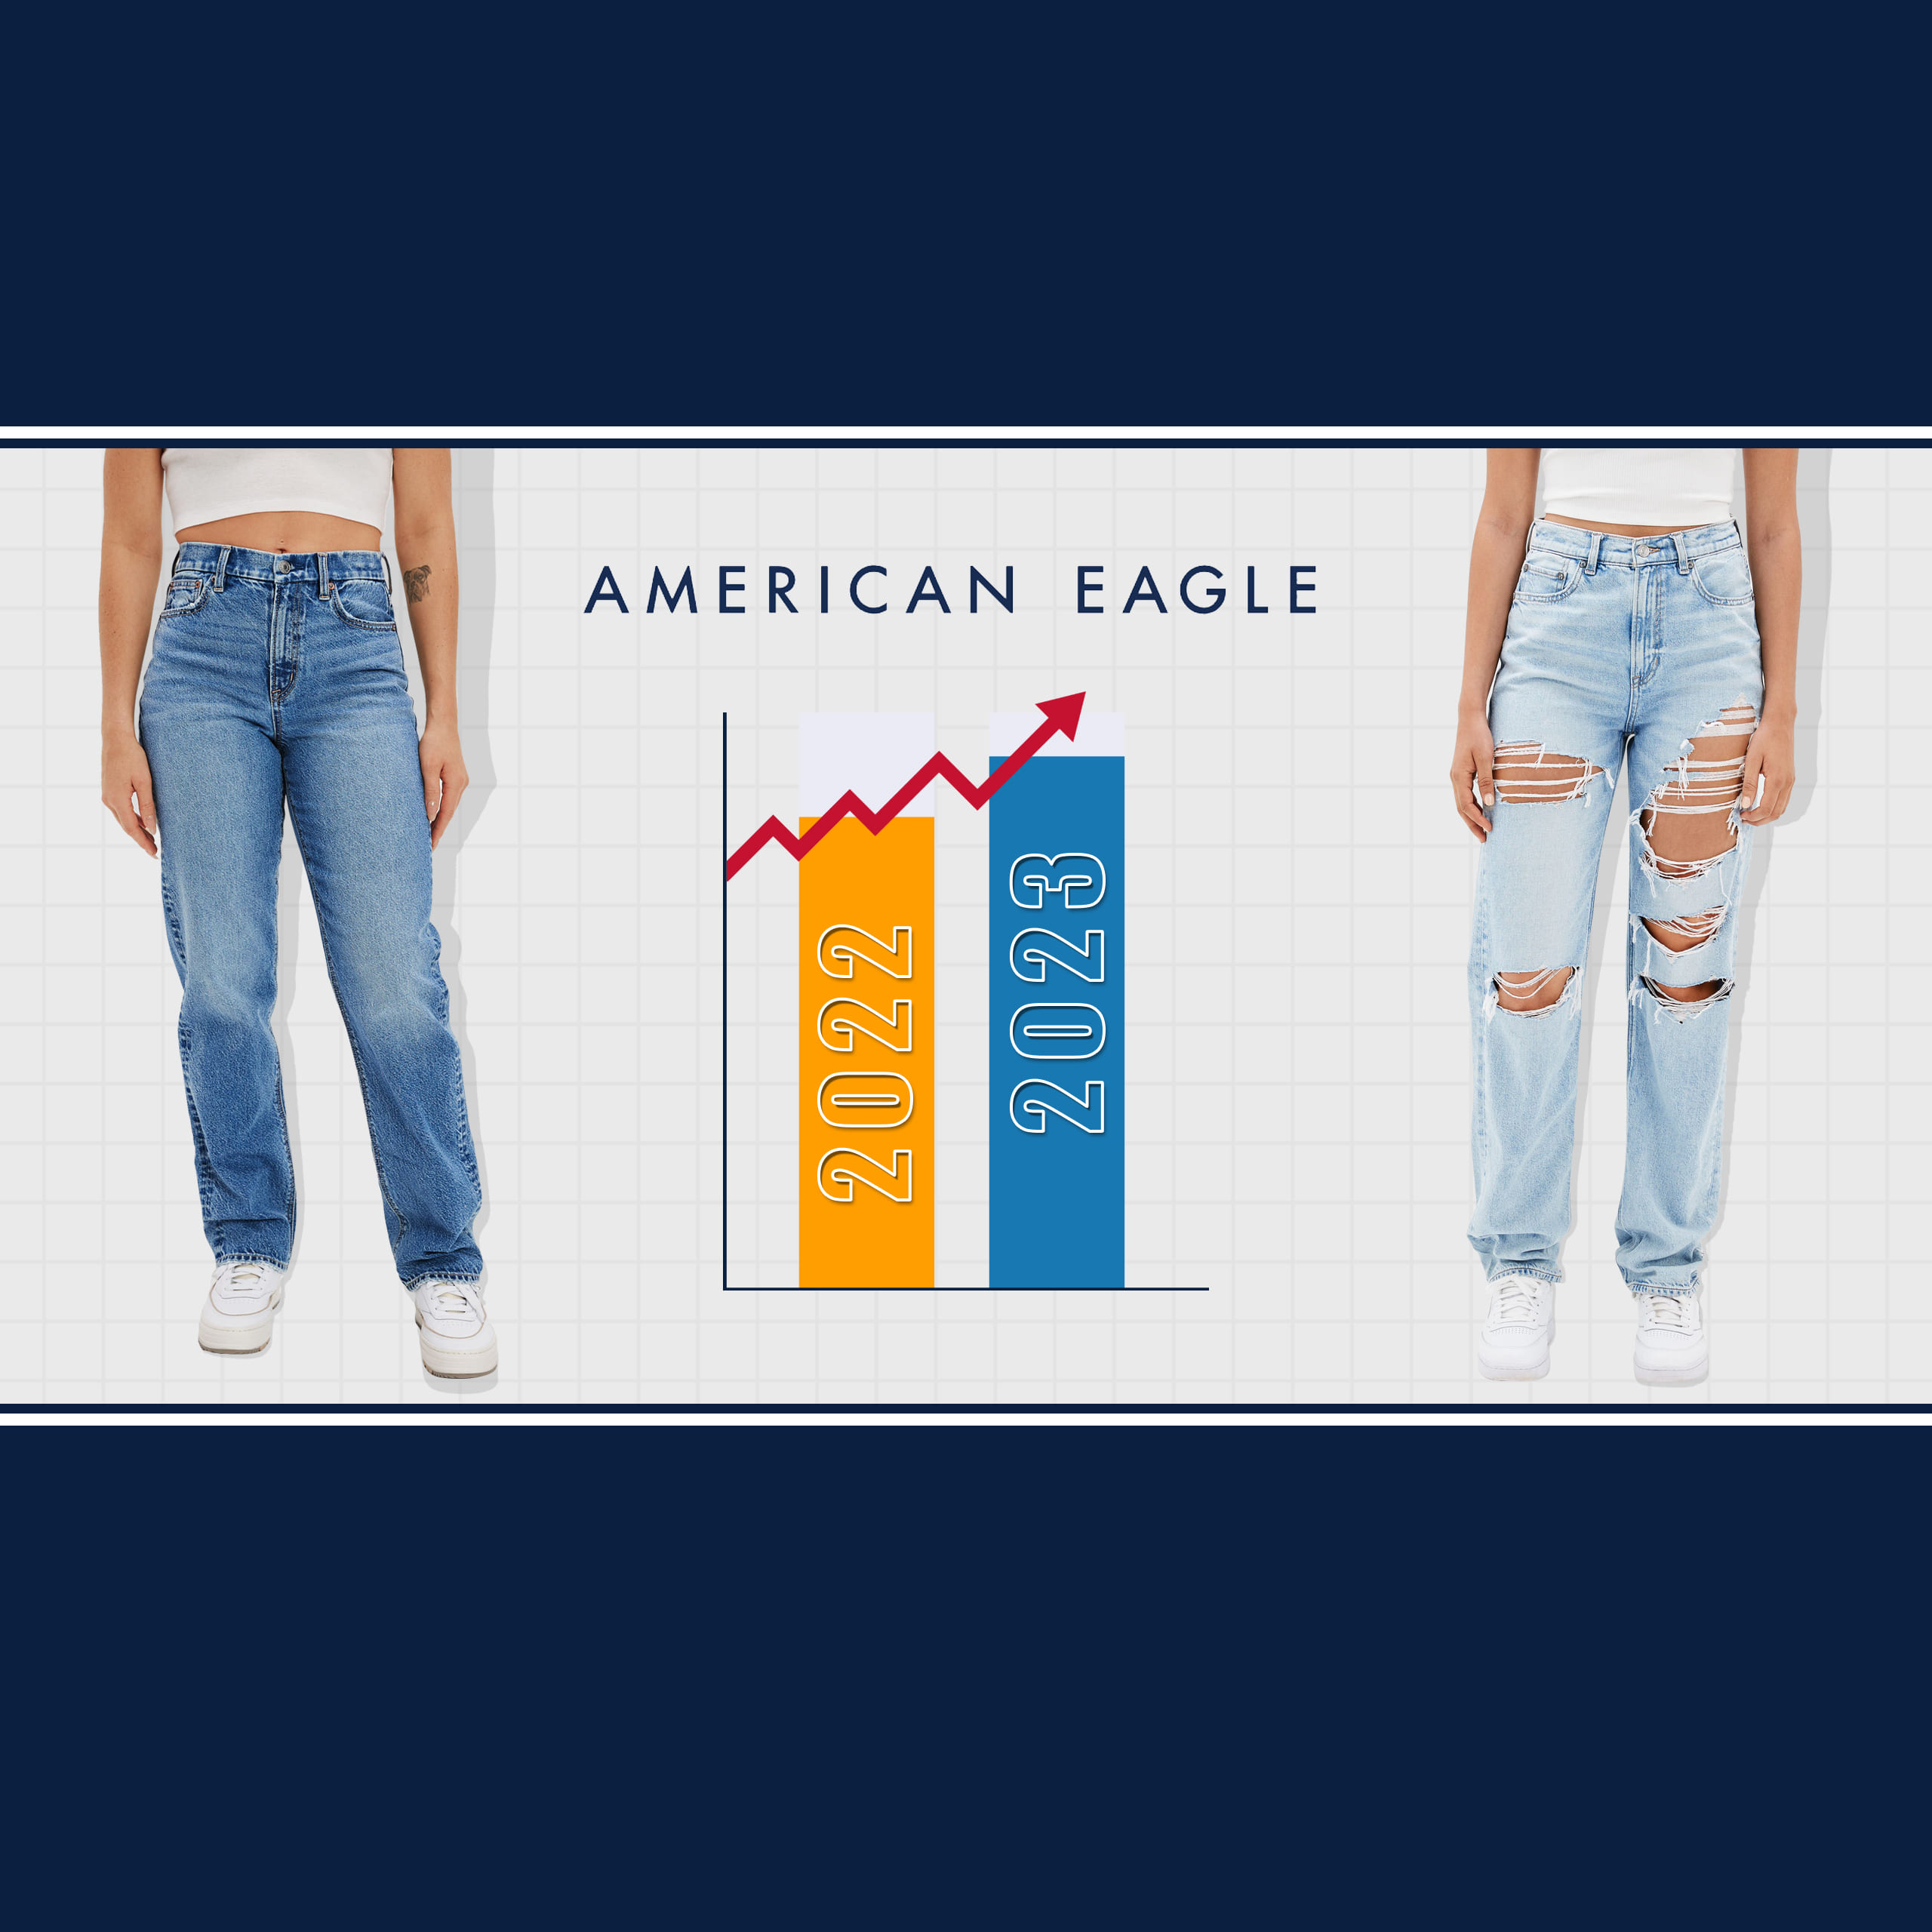 American Eagle Women Jeans USA - An Analysis And Comparison OF